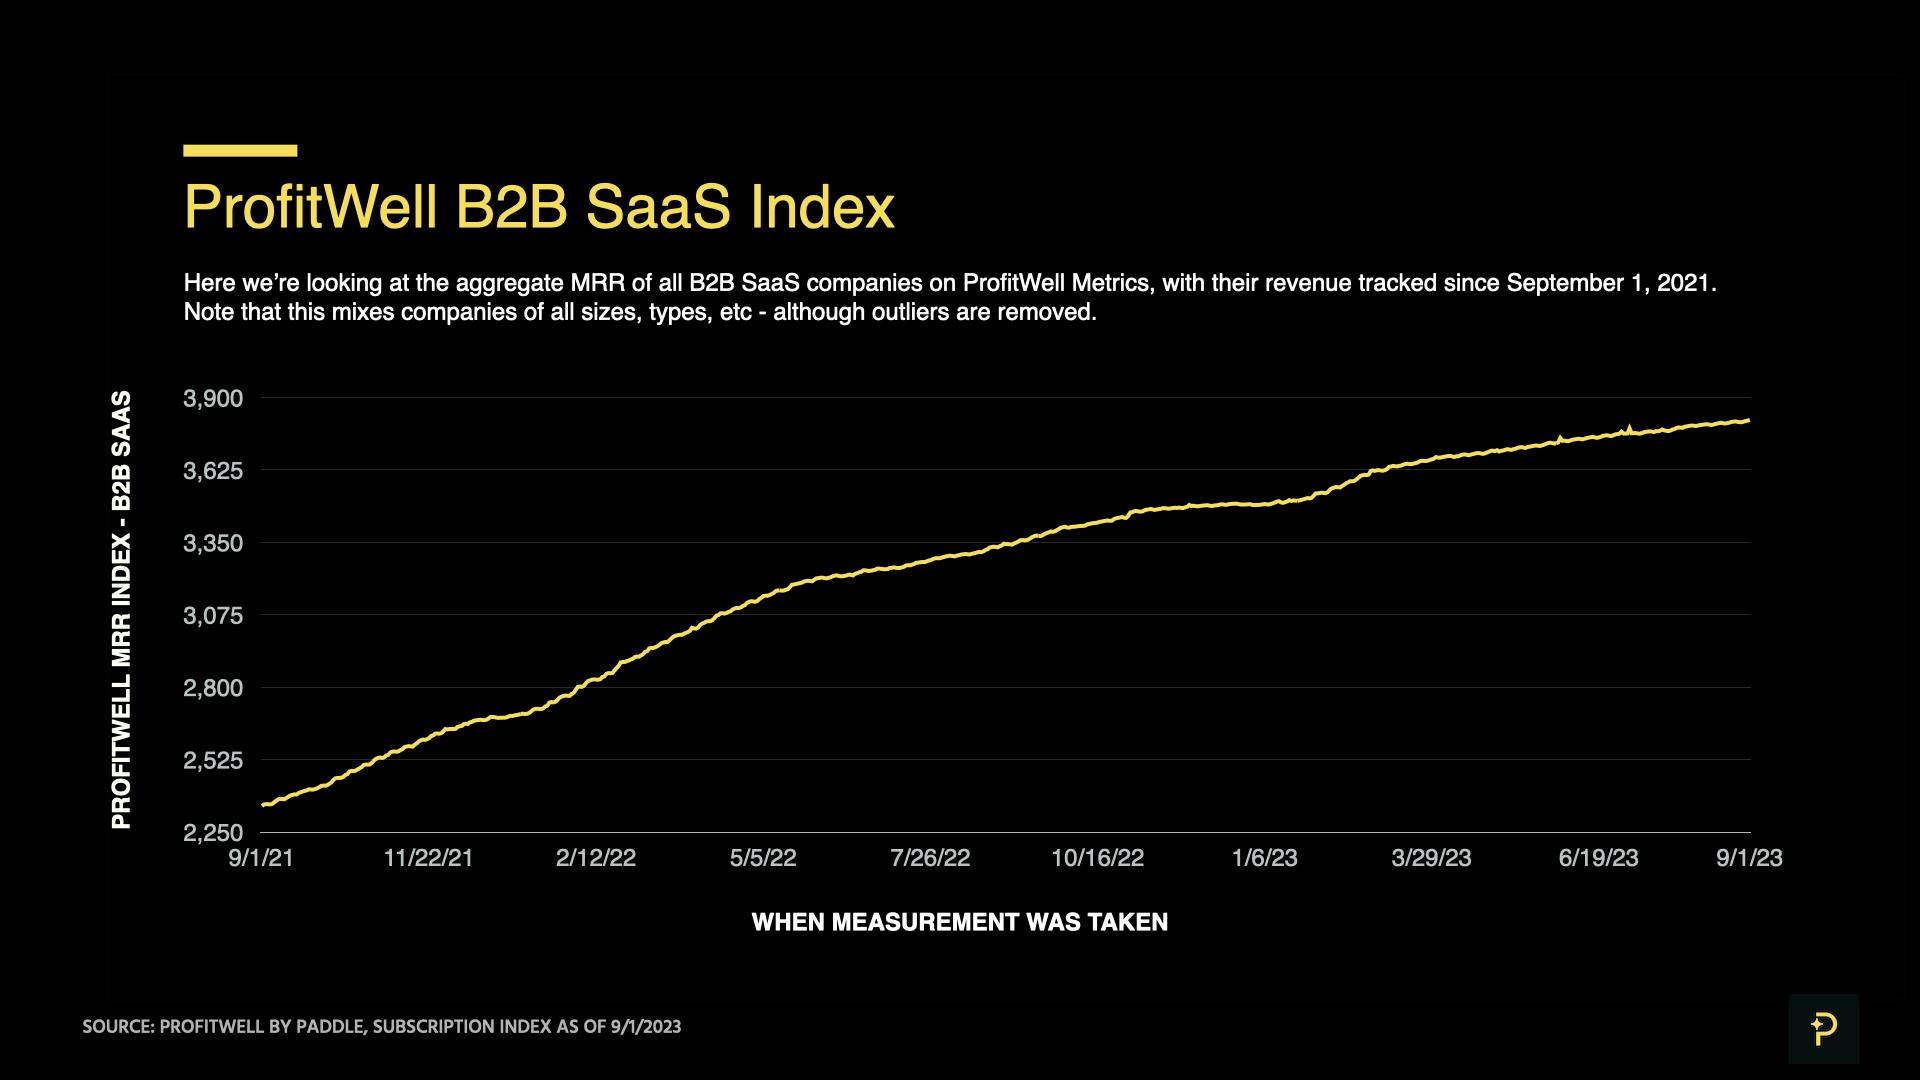 ProfitWell B2B SaaS Index as of September 1, 2023 - MRR over time